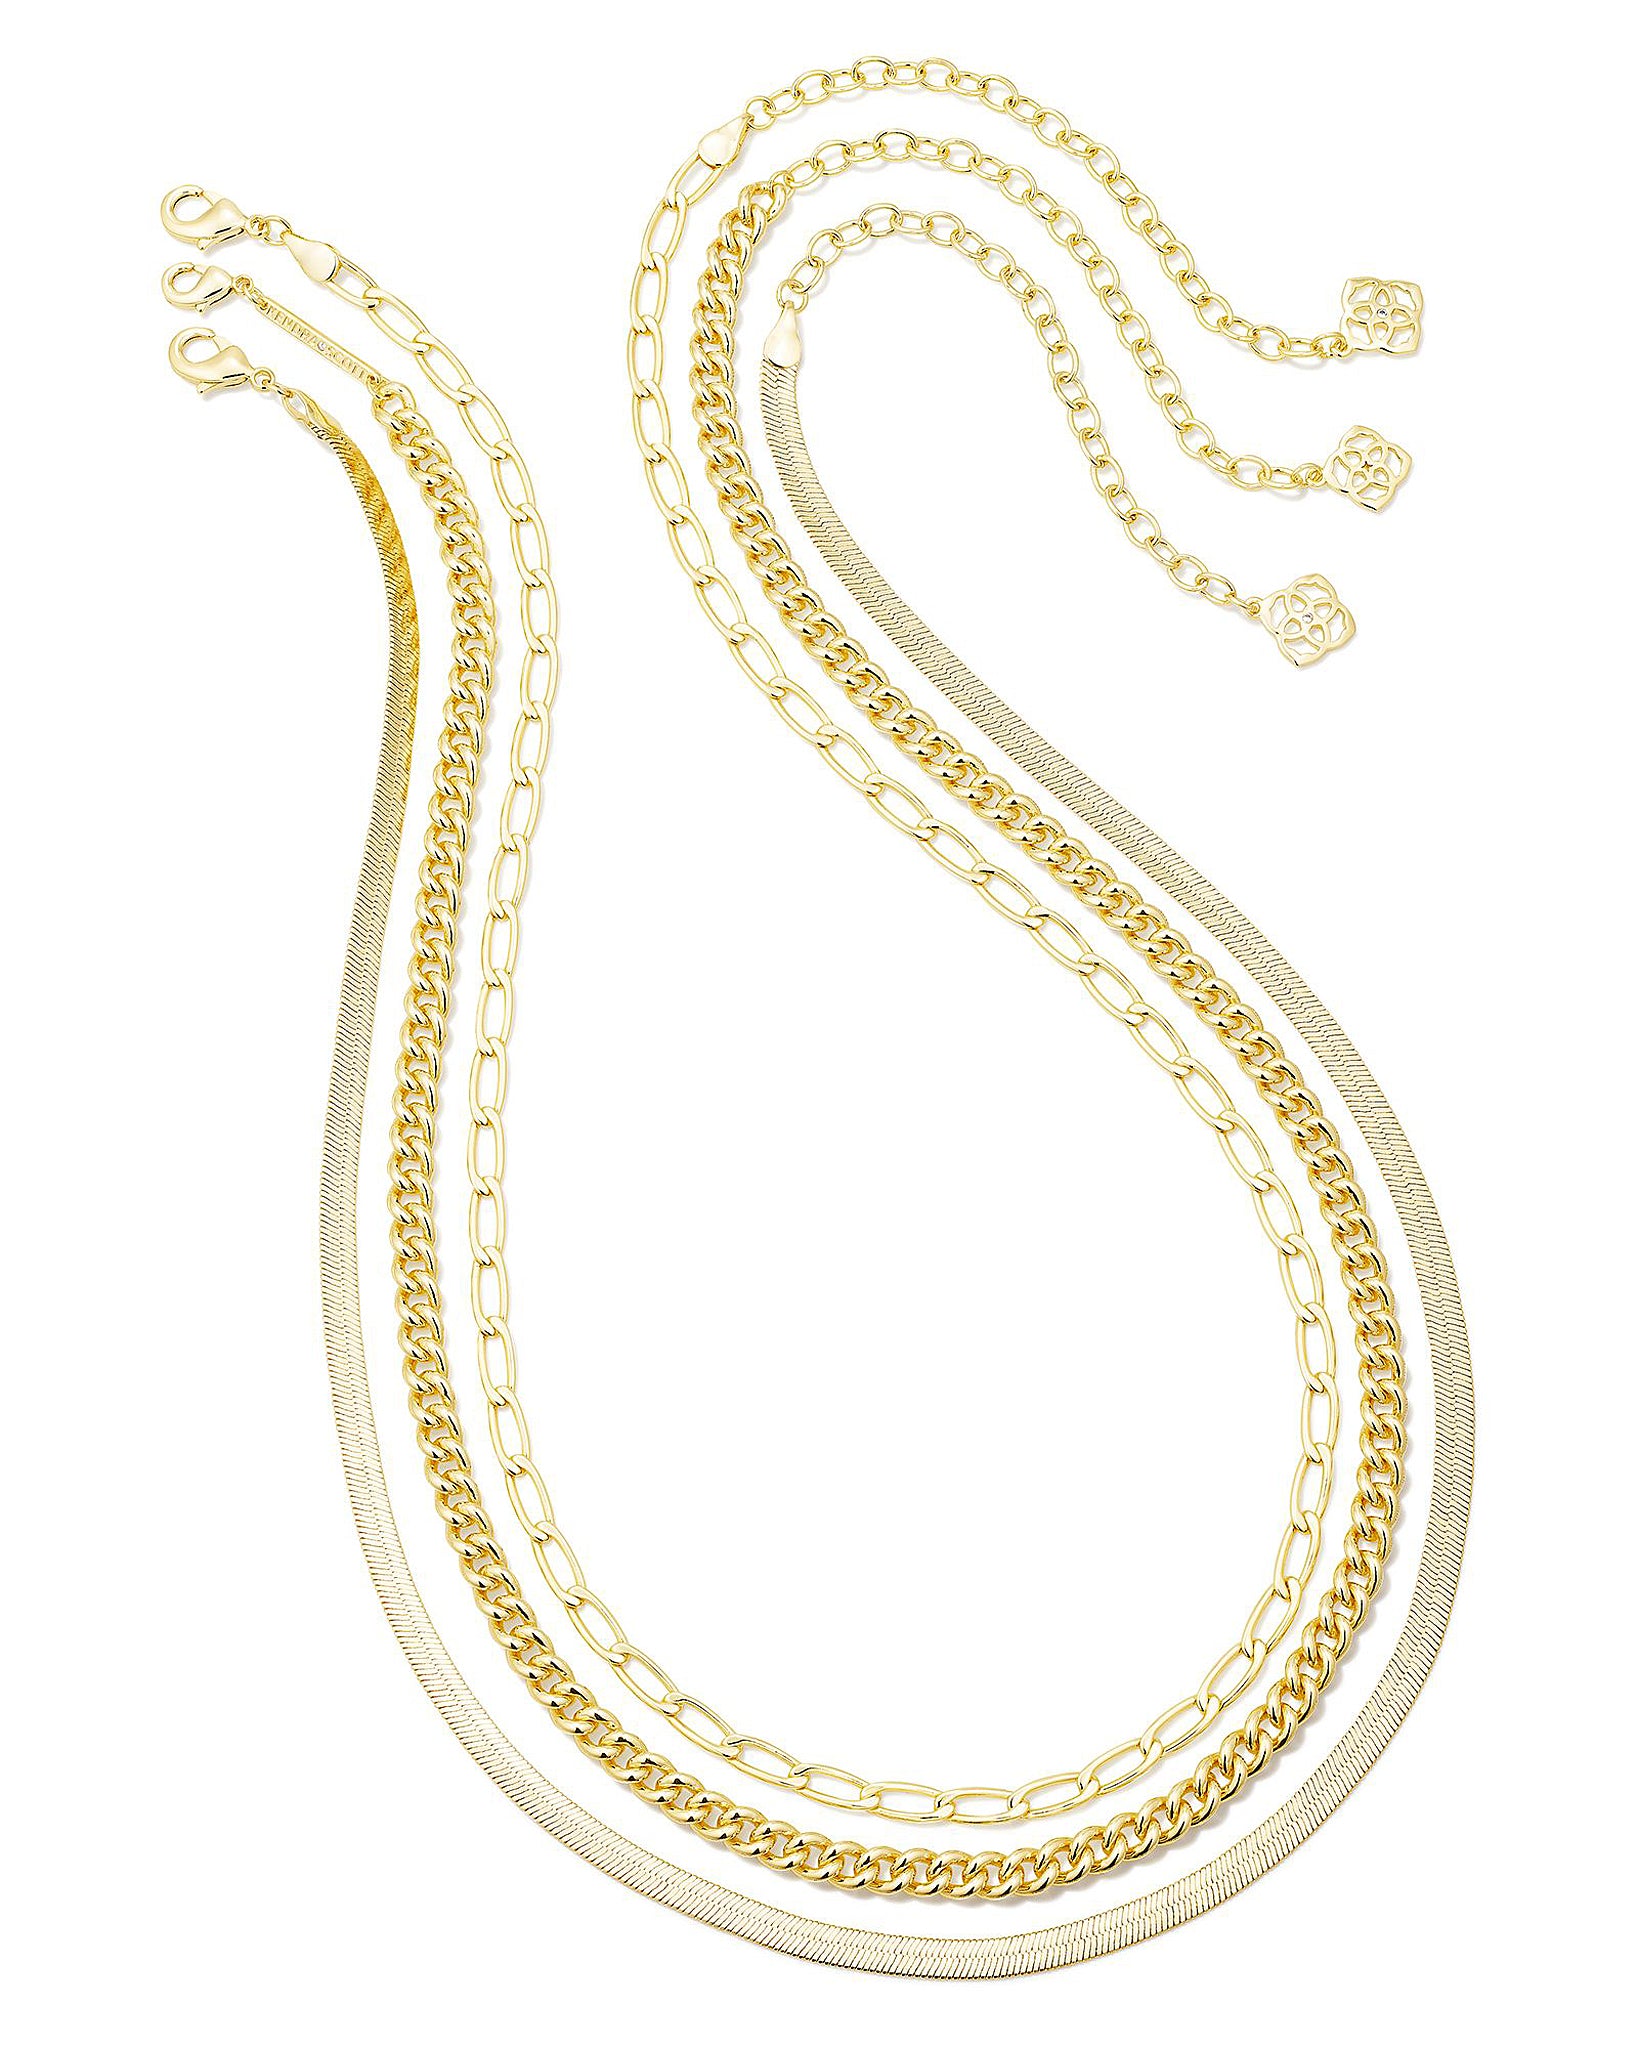 Kendra Scott Chain Layering Necklaces Set of Three in Gold Plated